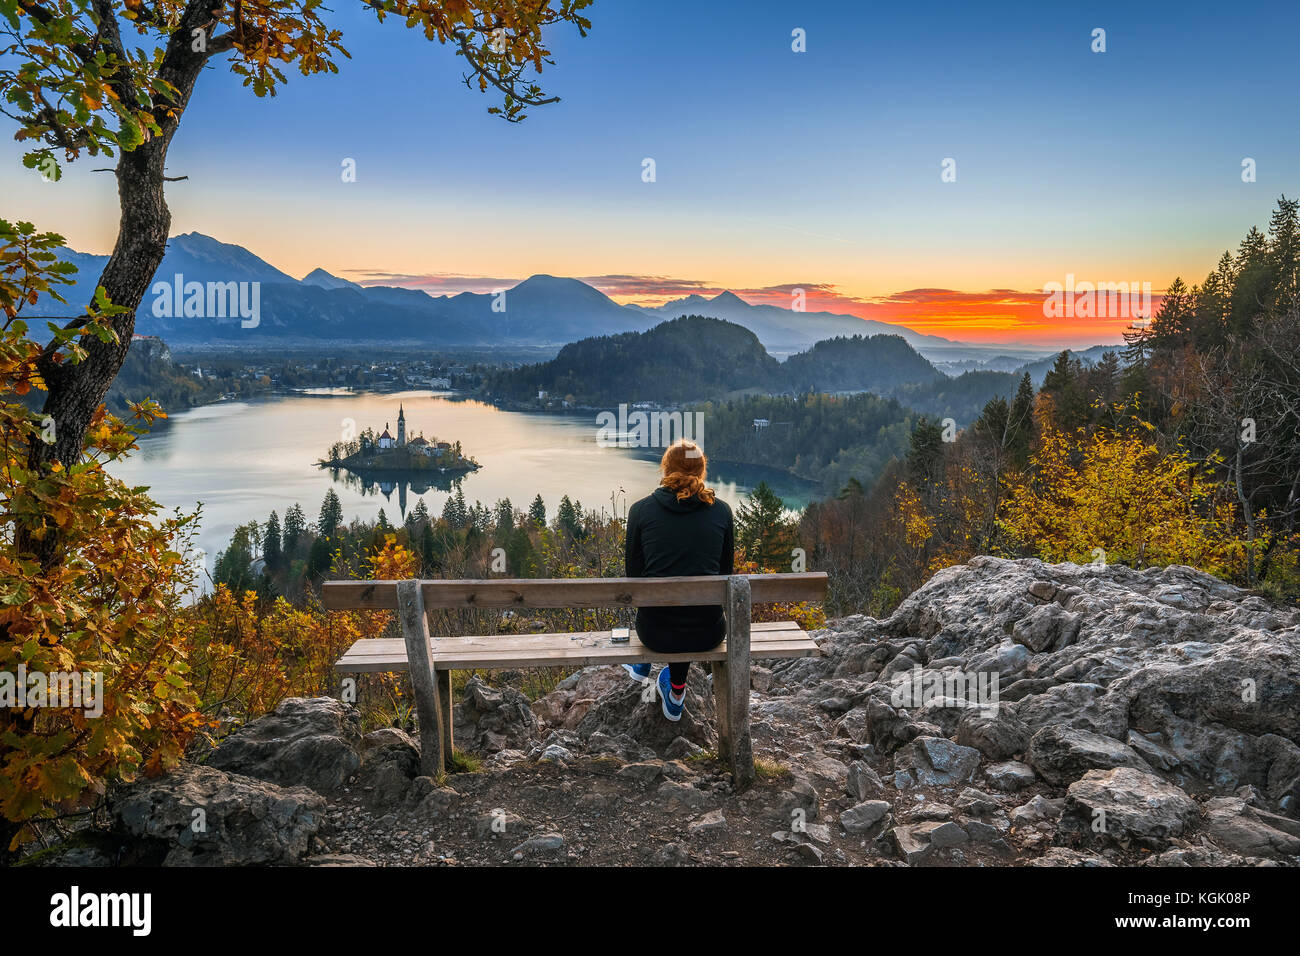 Bled, Slovenia - Red hair runner woman relaxing and enjoying the beautiful autumn view and the colorful sunrise of Lake Bled sitting on a hilltop benc Stock Photo